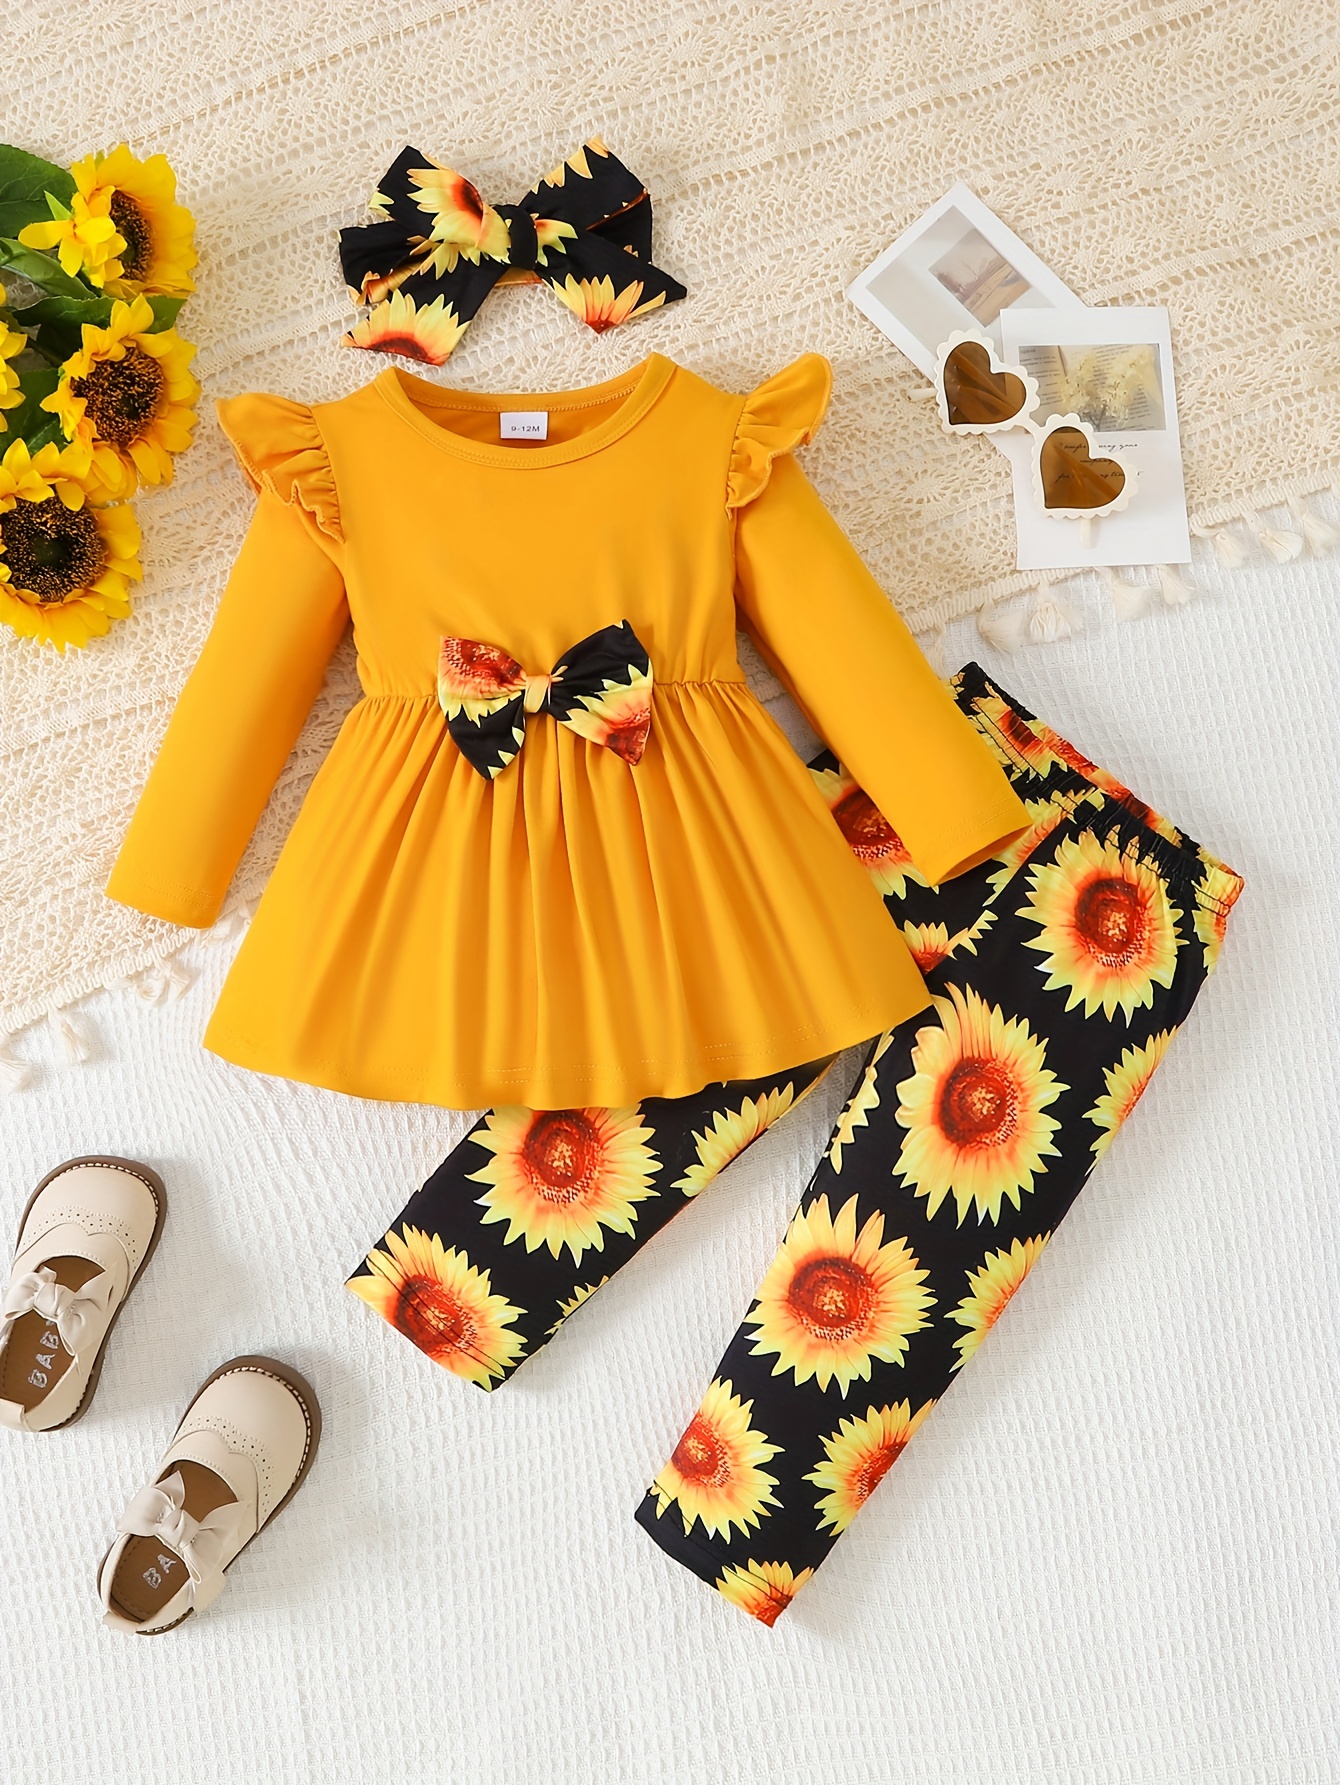 Toddler Baby Girls Cute Outfits - Sunflower Print Long Sleeve Flying Sleeve  Bow Top + Print Pants + Bandana Set